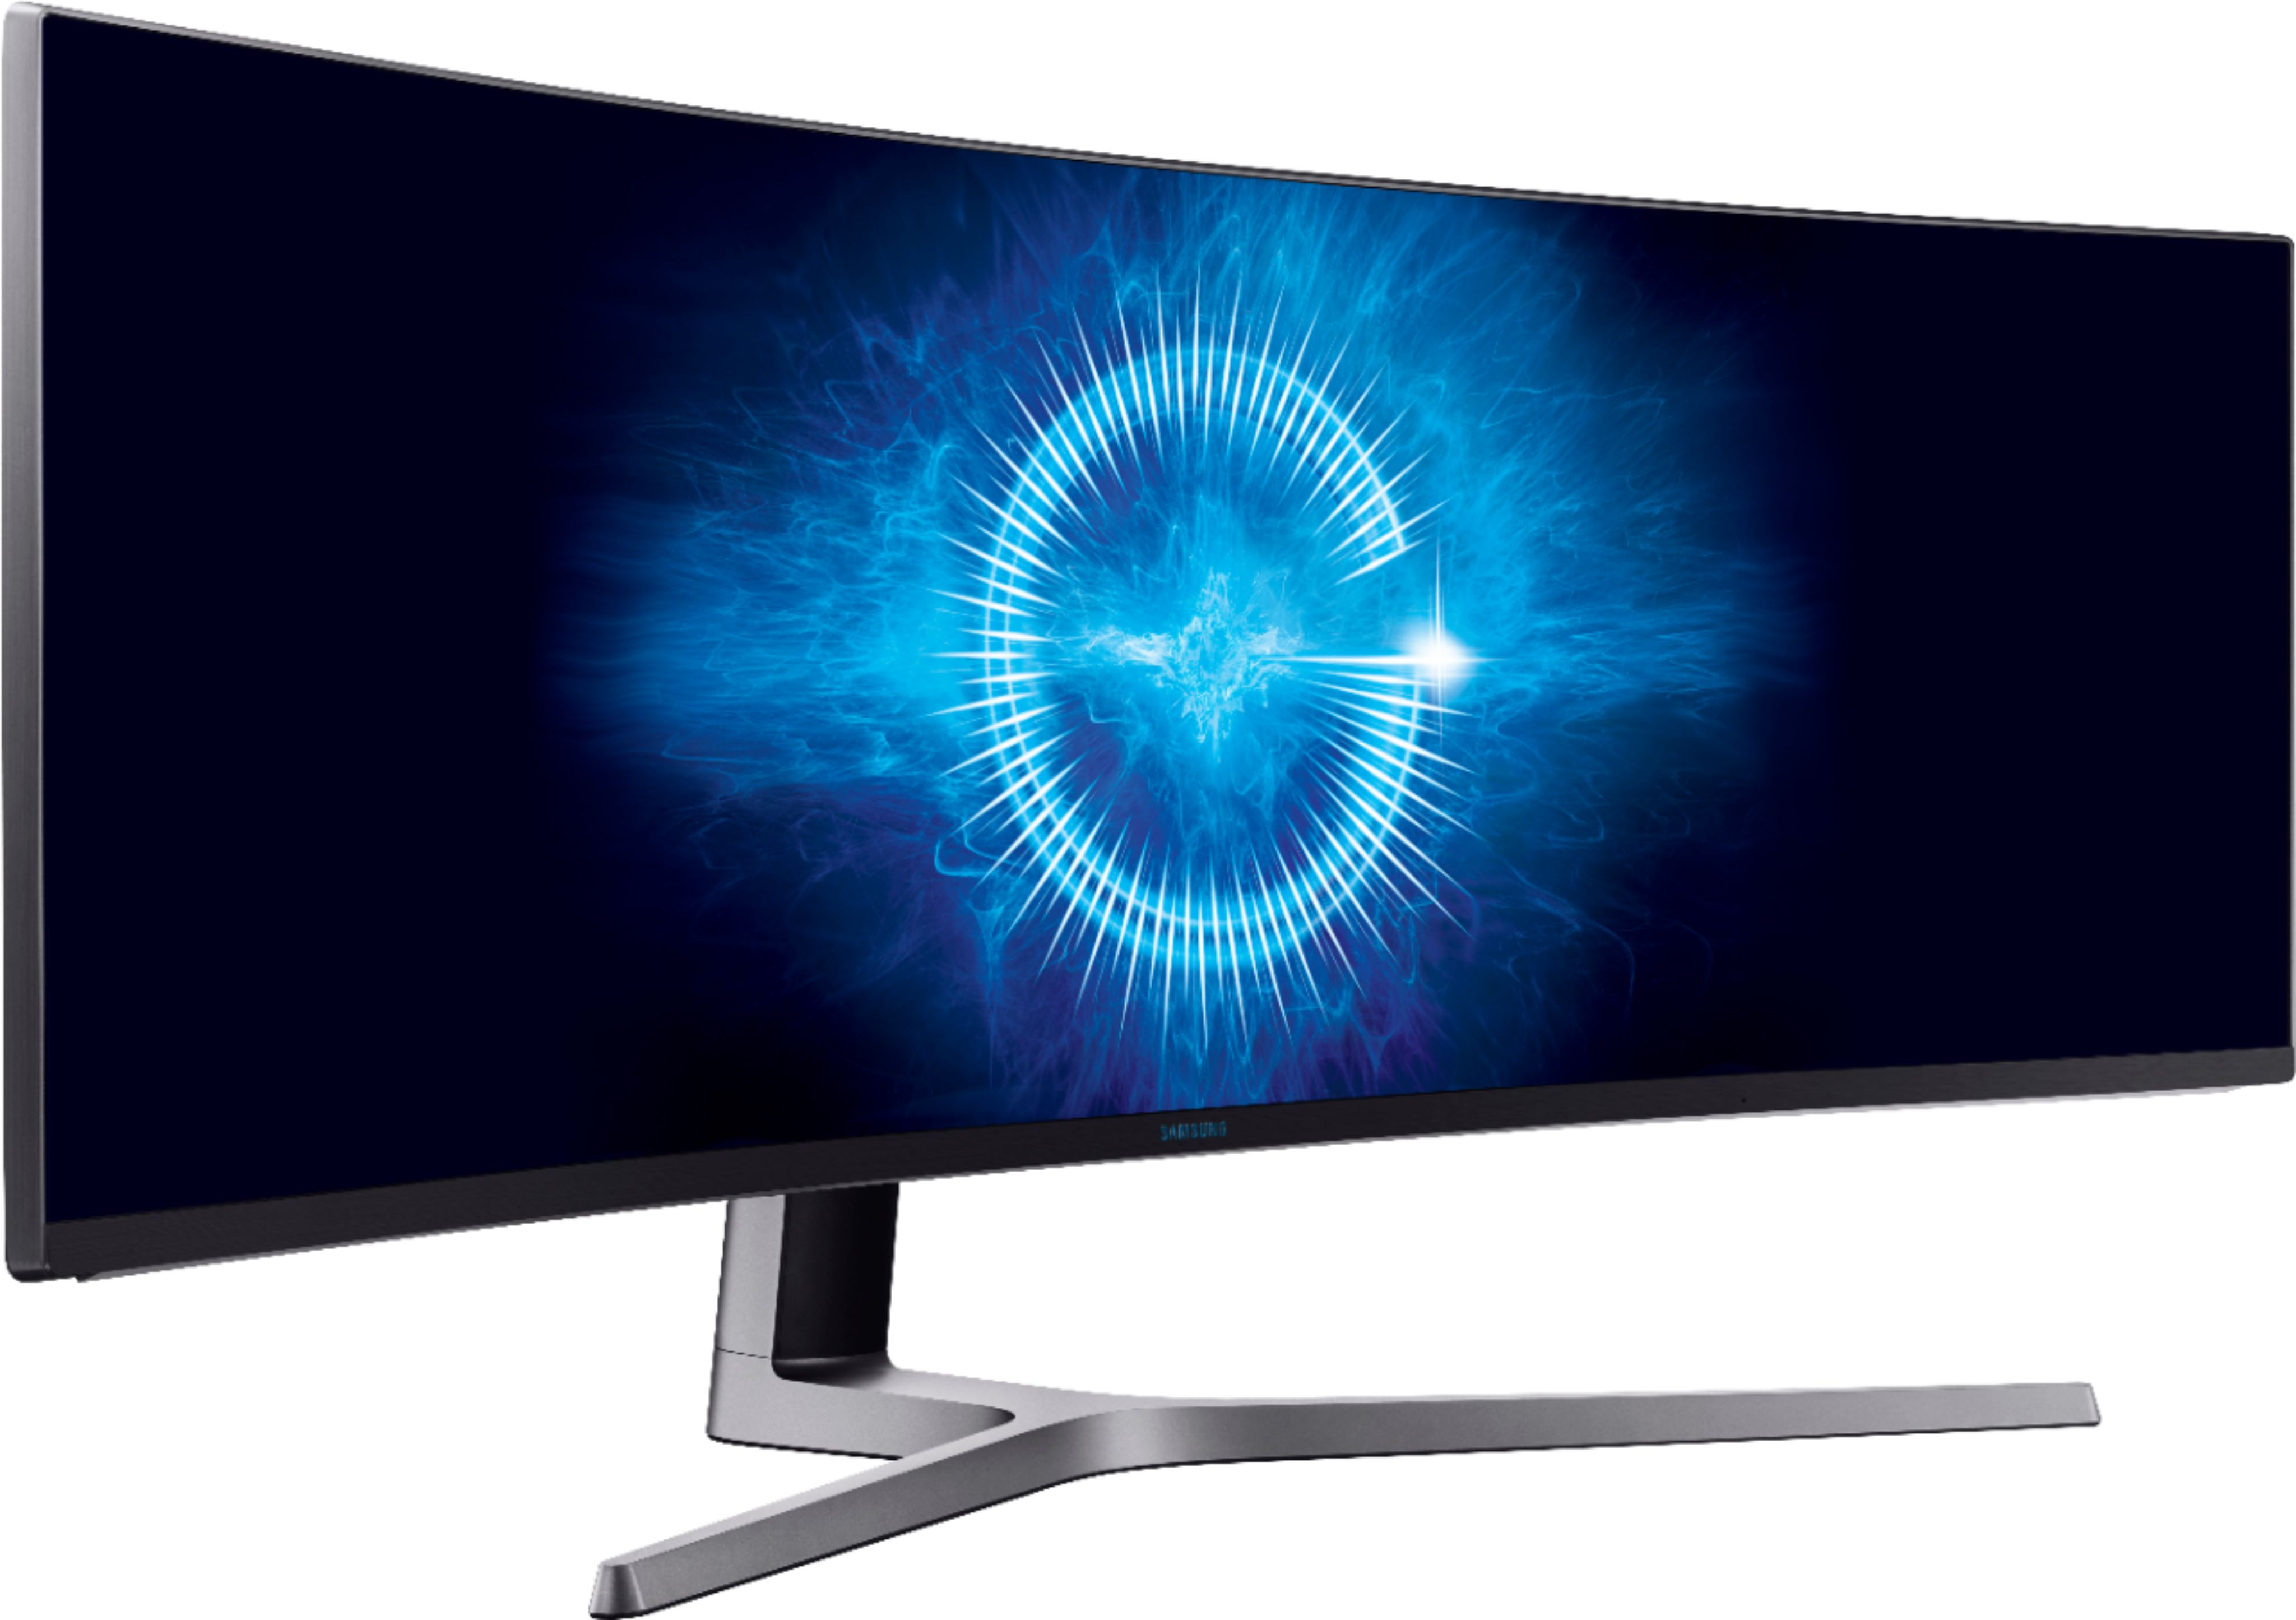 Angle View: Samsung - Geek Squad Certified Refurbished 49" LED Curved FHD FreeSync Monitor with HDR - Matte Dark Blue/Black